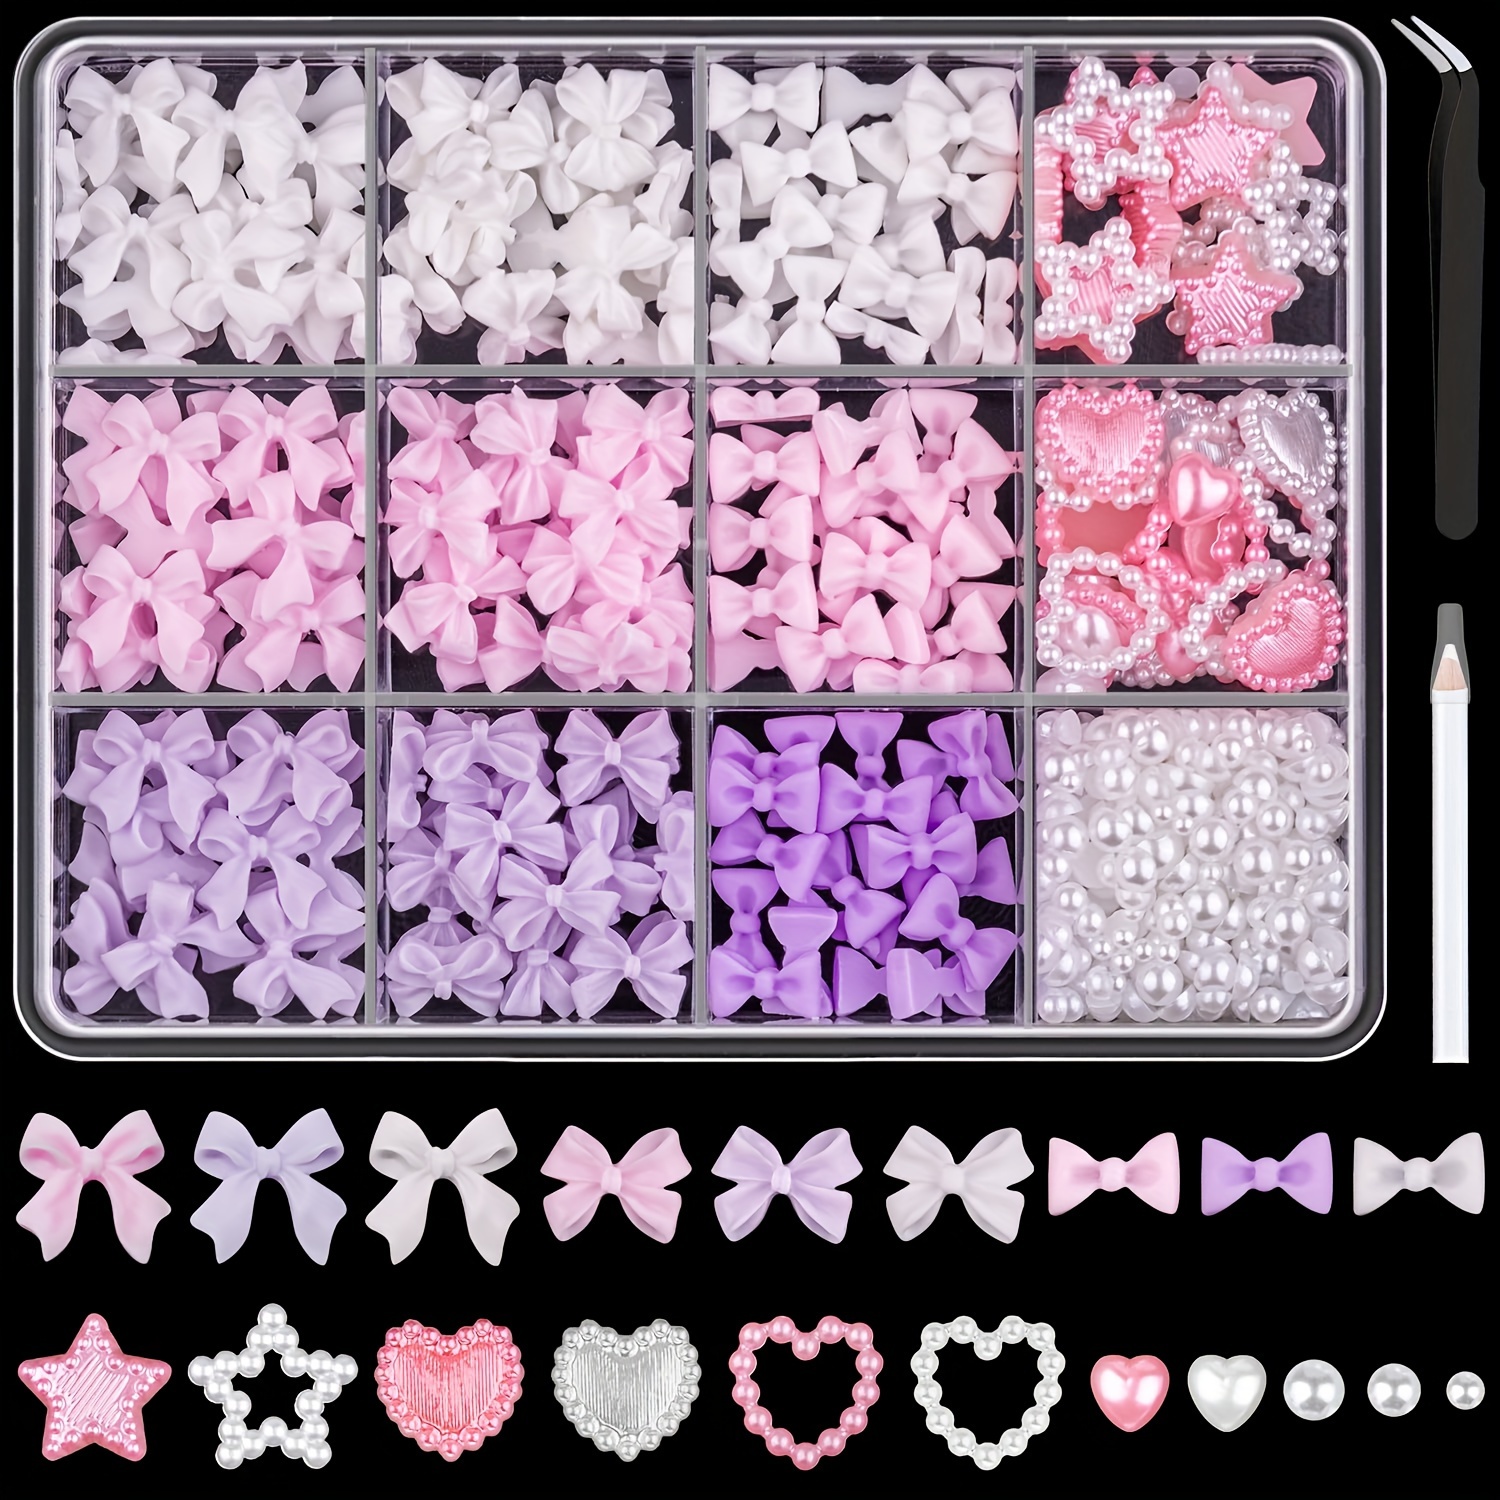 

300pcs 3d Nail Charms And Flatback Pearls Multi Styles Bowknot Charms + Star Heart Nail Jewels + 2-6mm White Nail Pearls For Nail Art Design With Pickup Tools